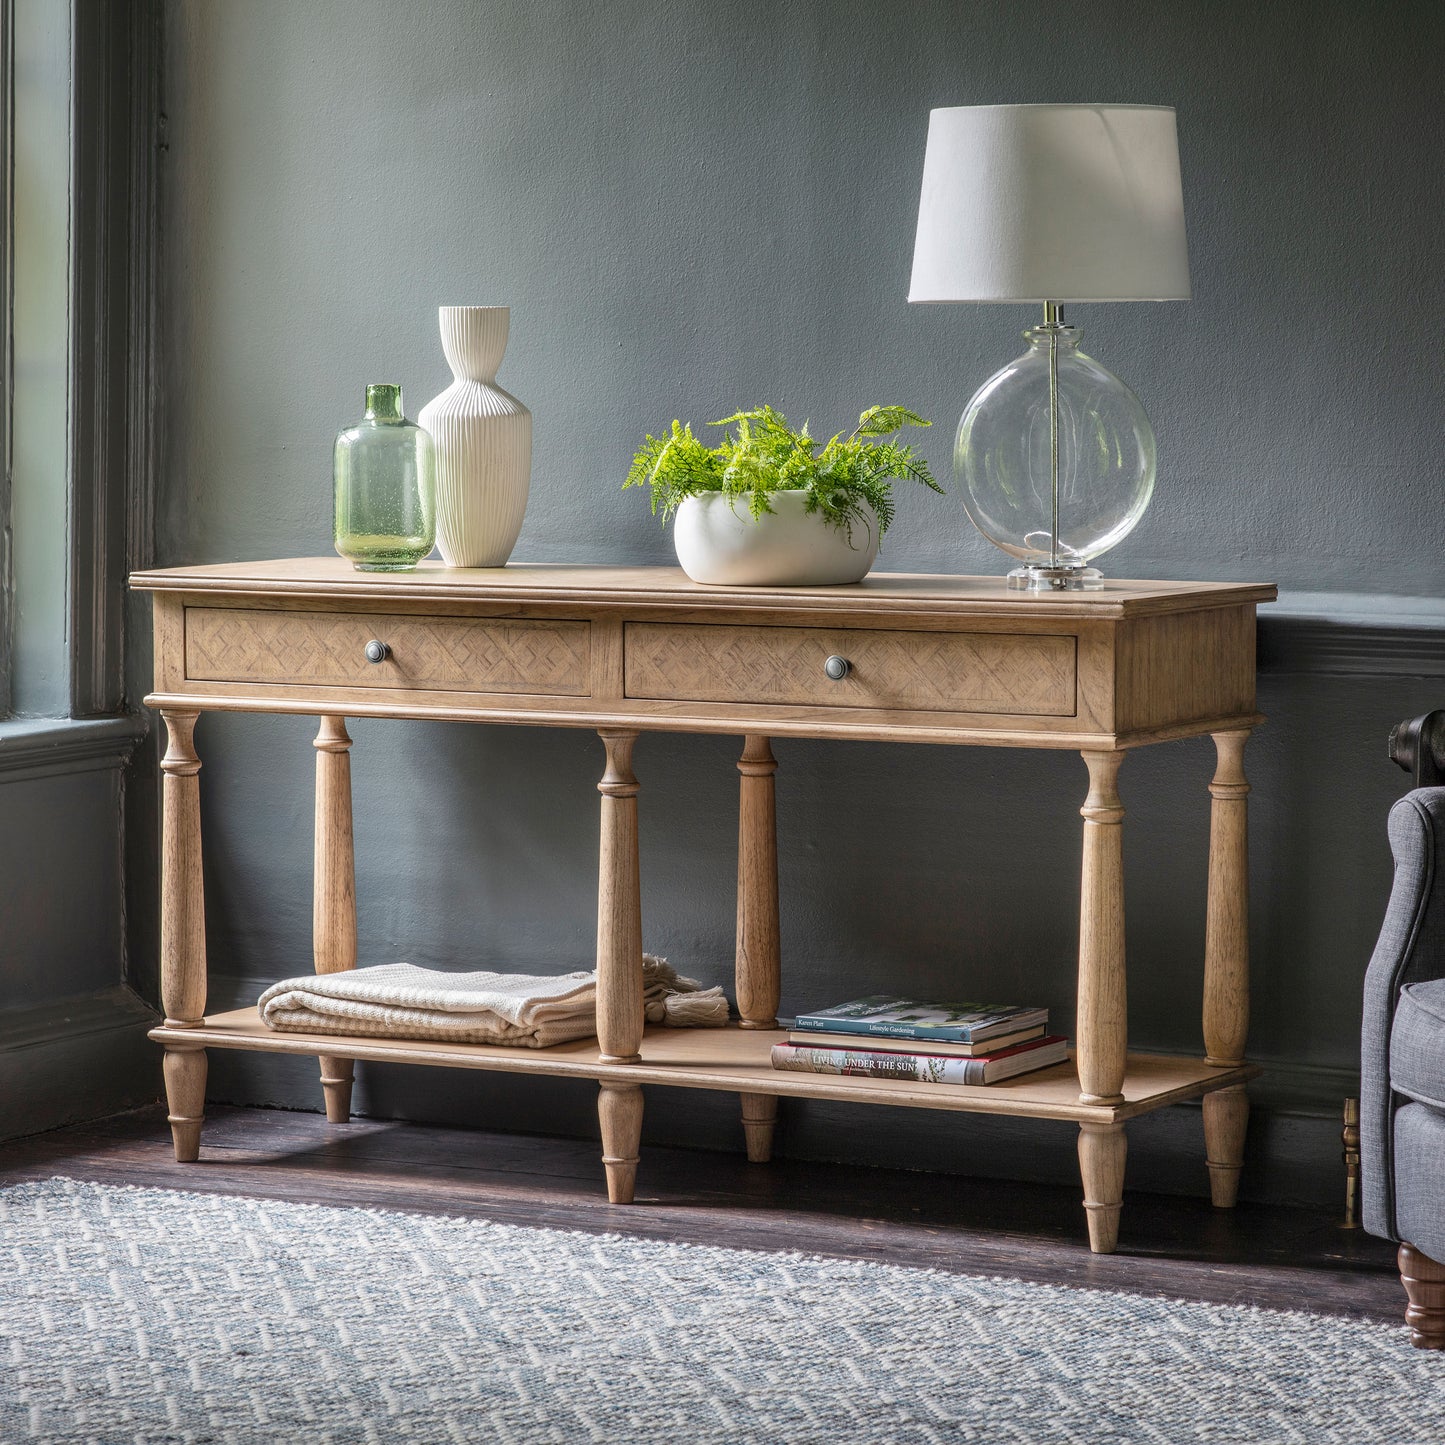 Load image into Gallery viewer, A Belsford 2 Drawer Console Table 1500x450x800mm from Kikiathome.co.uk for home furniture and interior decor.
